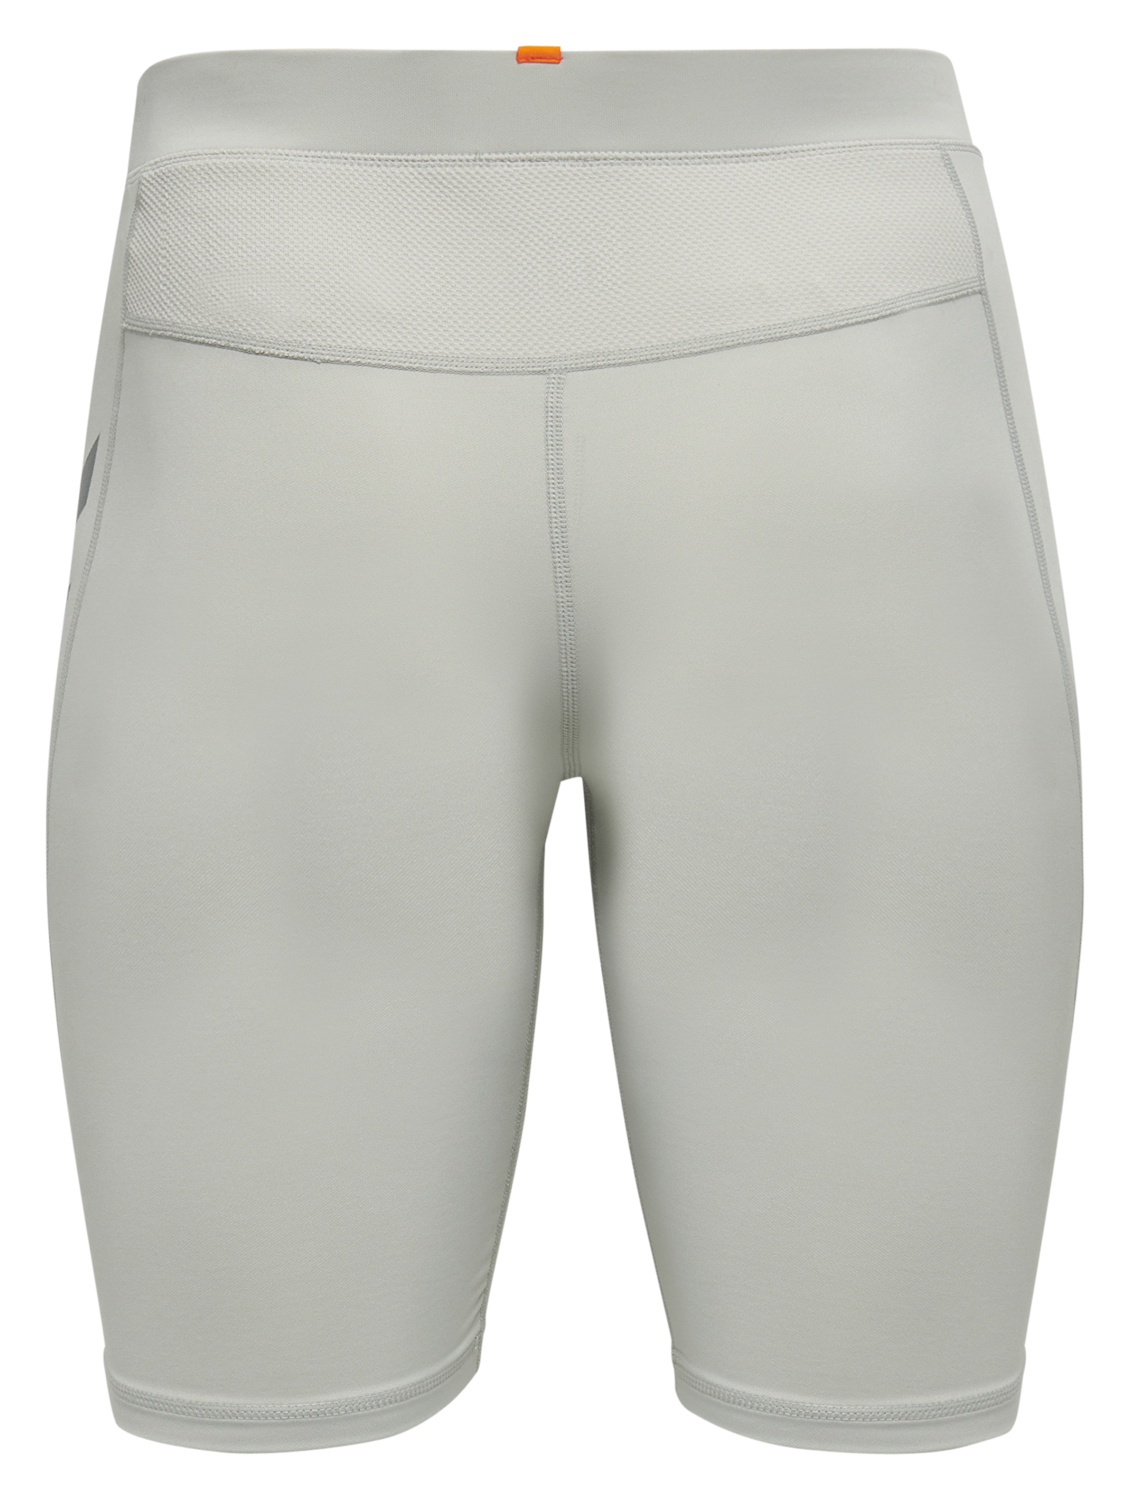 > hummel compression shorts > at lowest prices